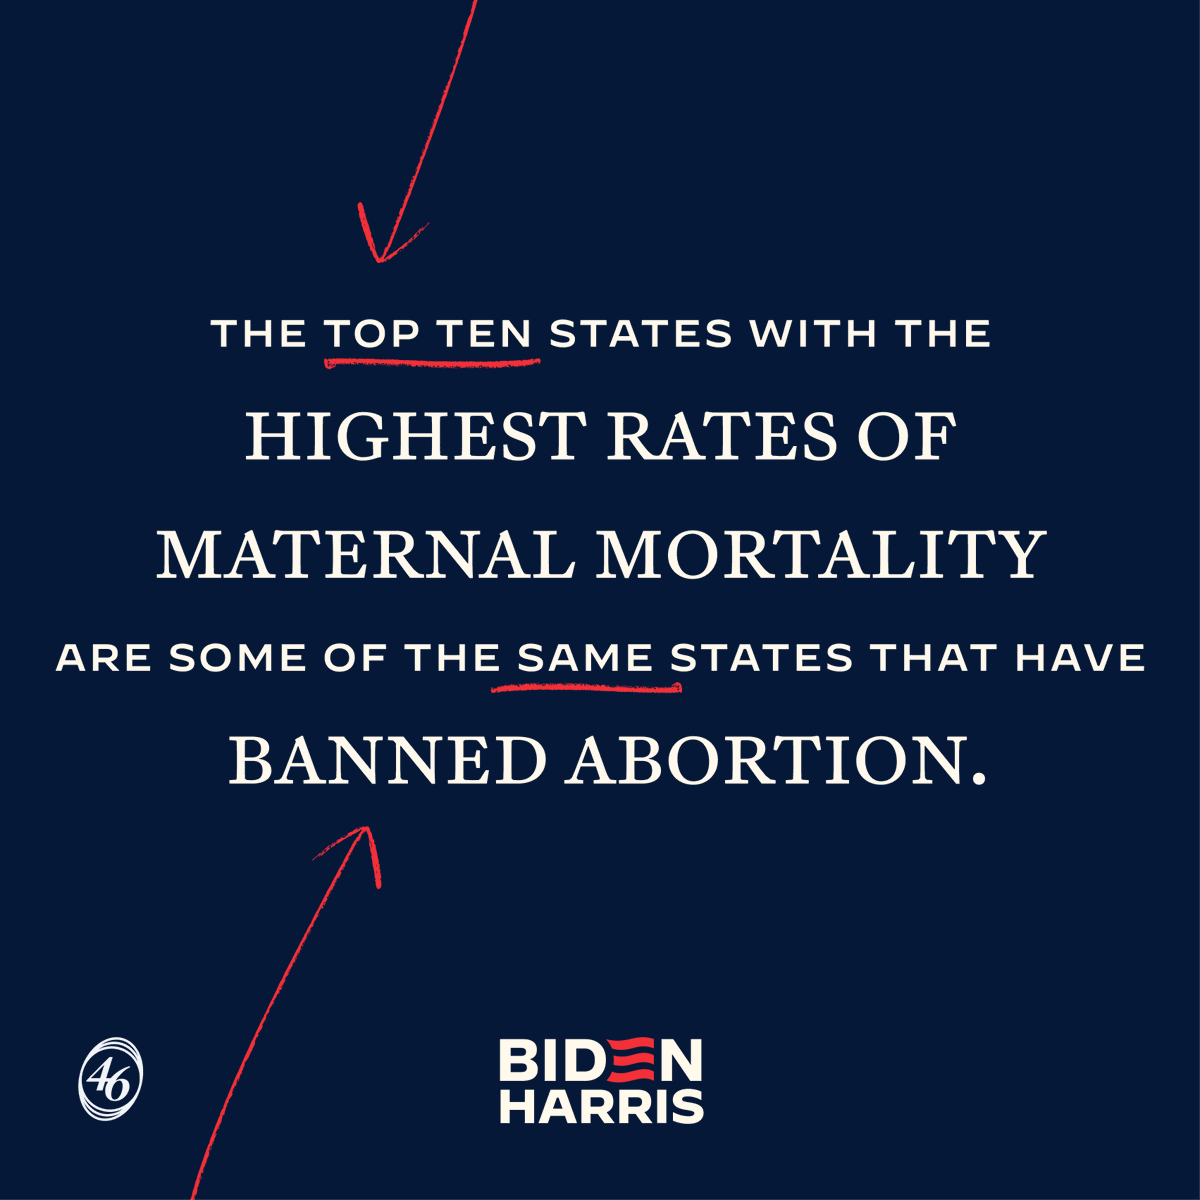 I have often challenged the so-called leaders in states who say that an abortion ban is in the best interest of women and children, yet they stay silent on maternal mortality. The hypocrisy abounds.